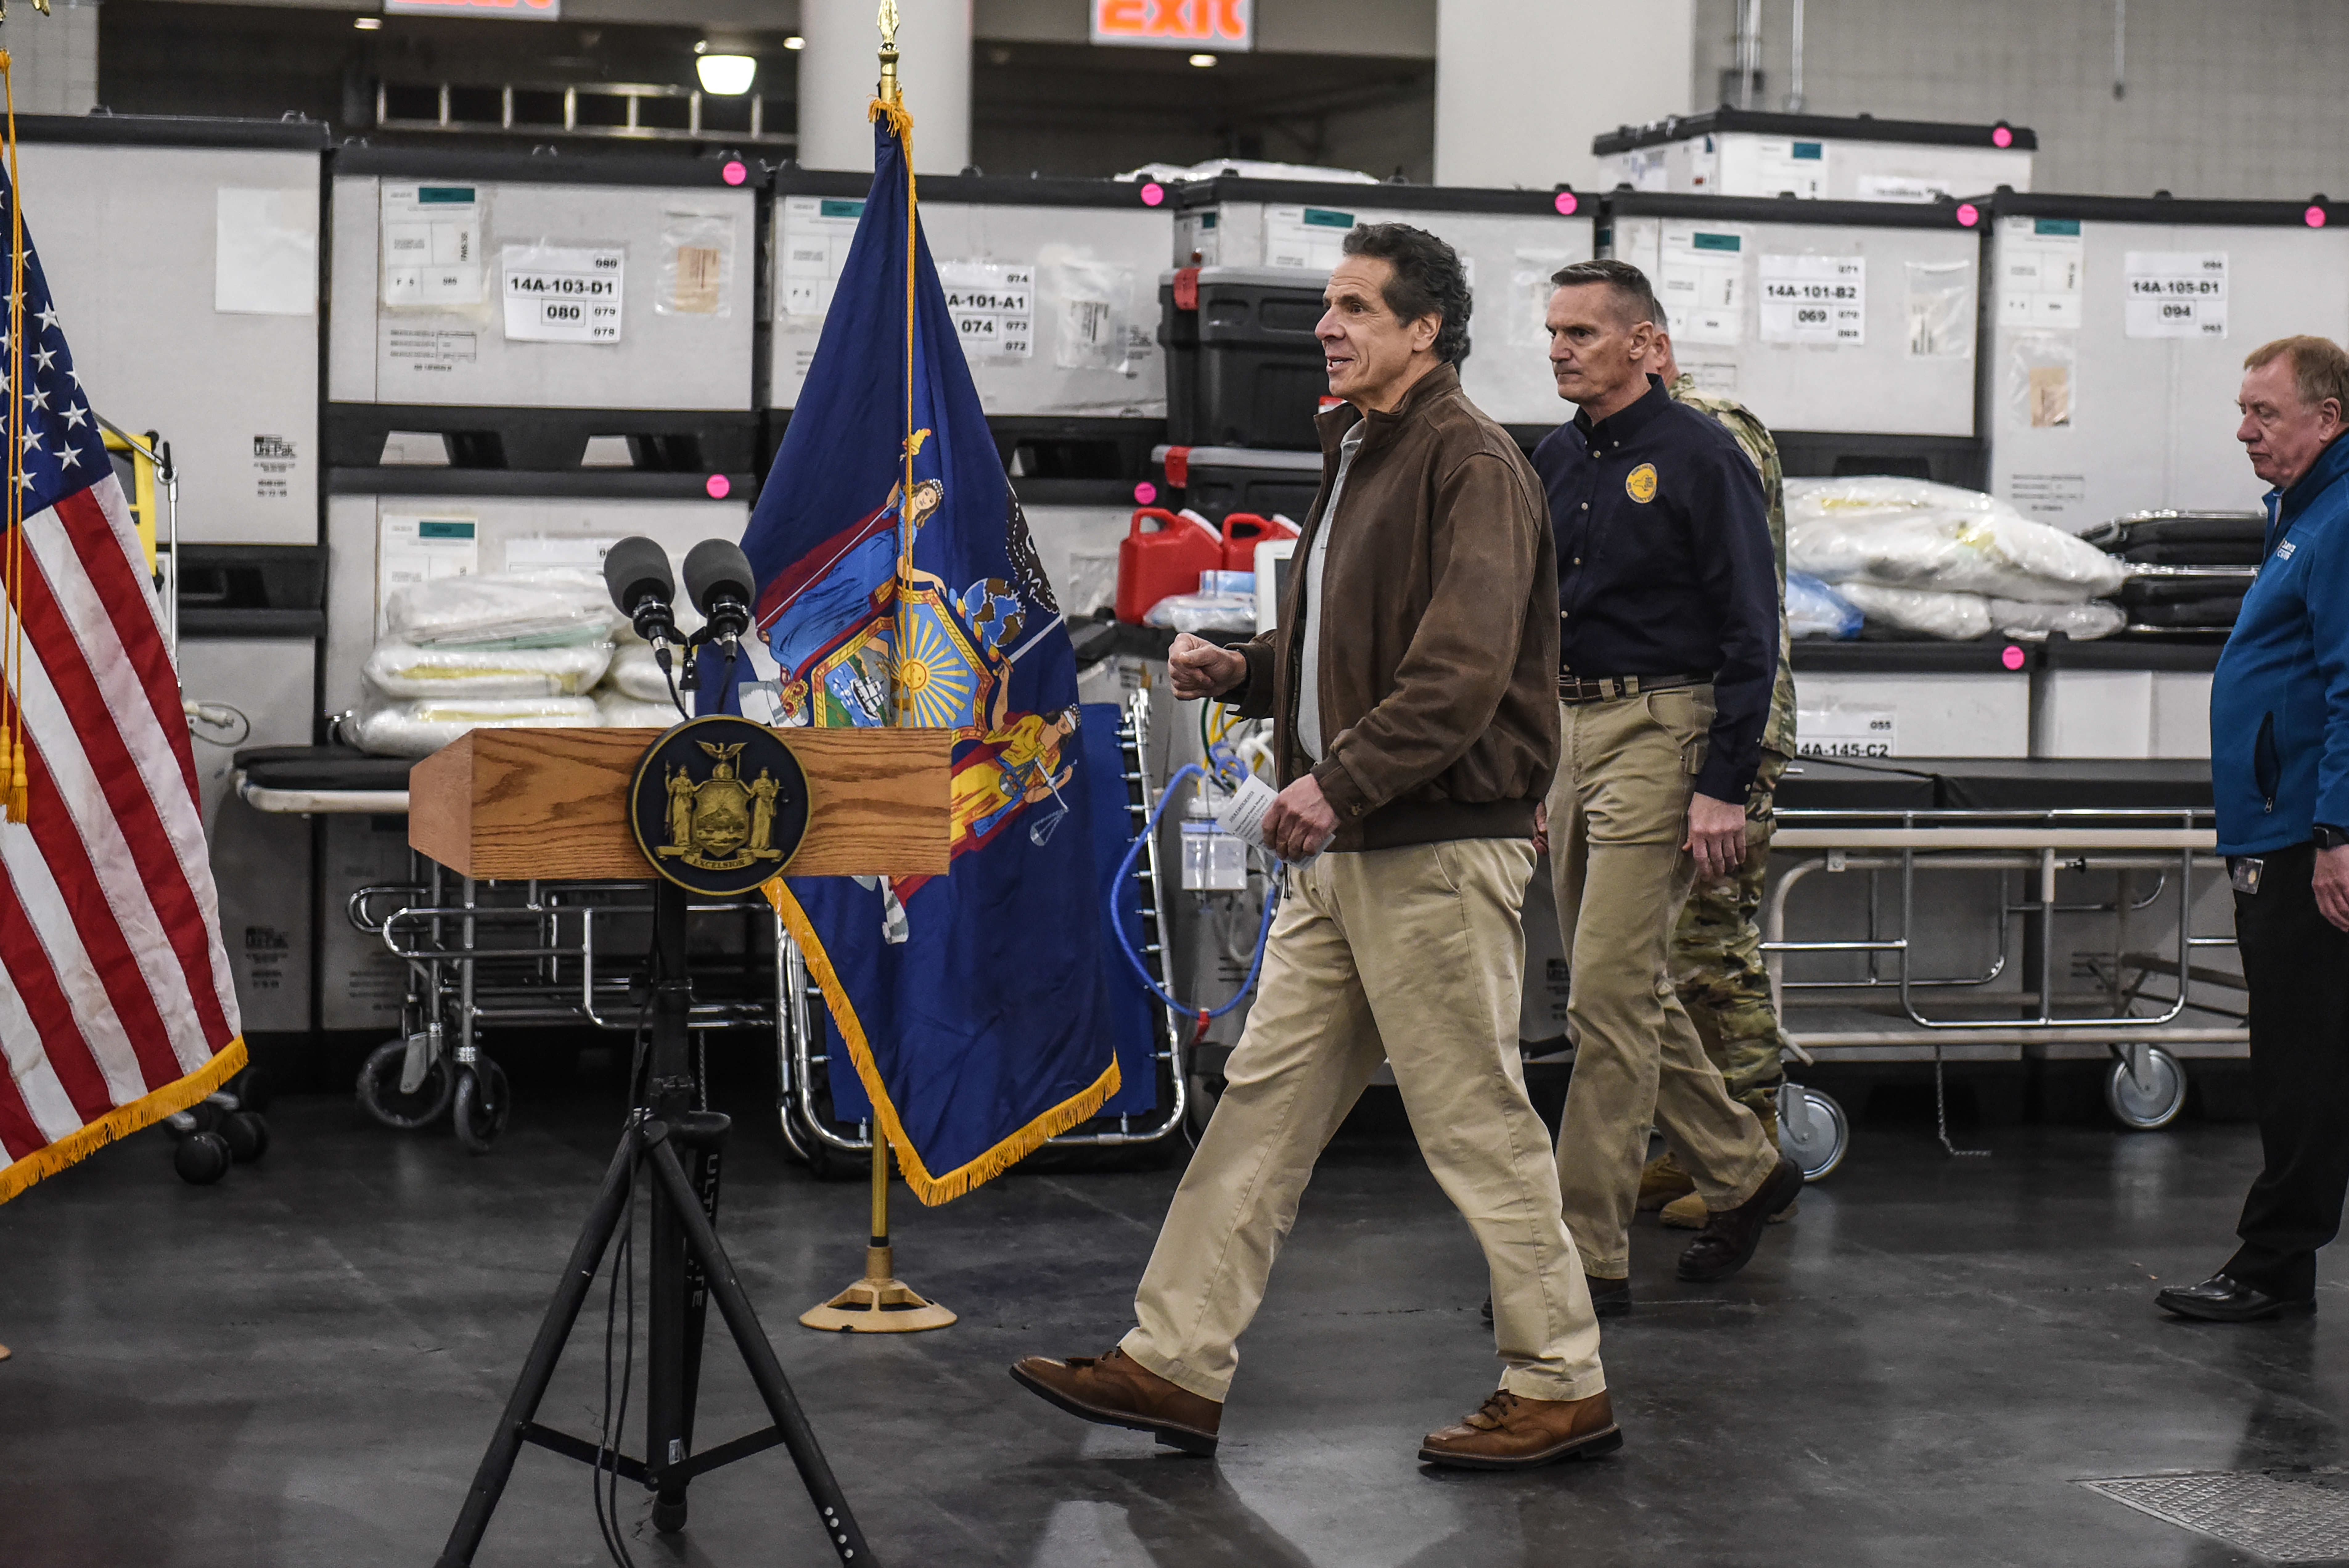 New York Gov. Andrew Cuomo prepares for a news conference at the Javits Center in New York, Tuesday, March 24, 2020, where the Army Corps of Engineers is turning the convention center into a 1,000-bed emergency hospital. With his coronavirus briefings, Gov. Andrew Cuomo has emerged as an authoritative voice in the crisis.